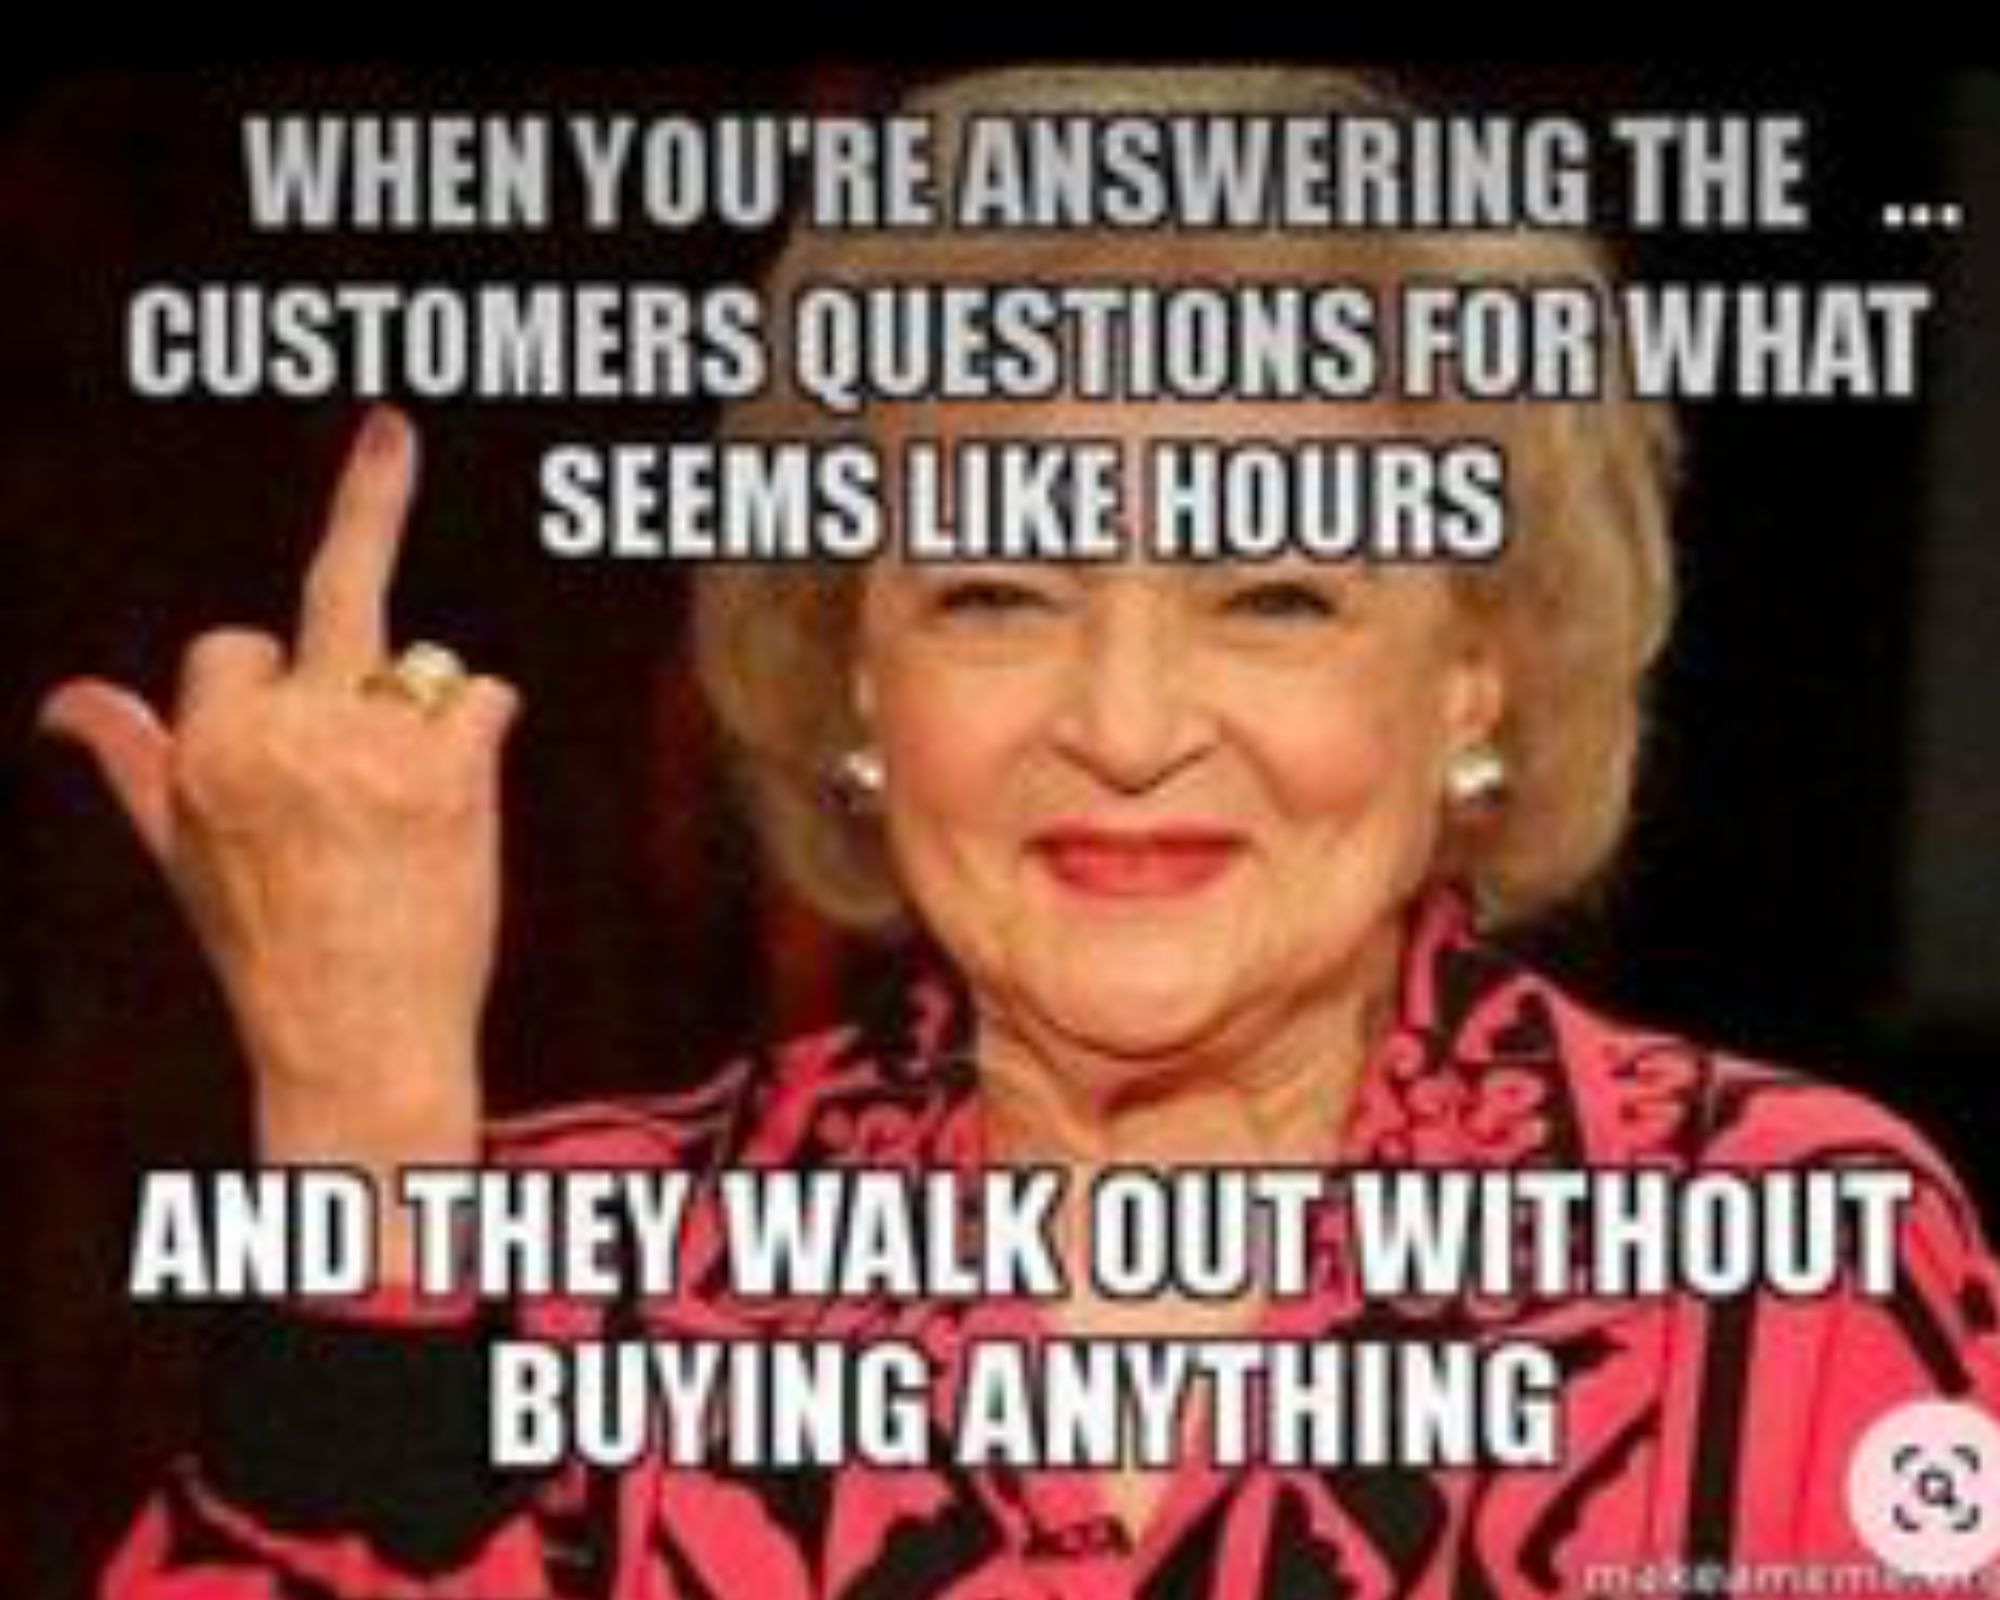 Betty White holding up her middle finger. Text says "When you're answering the customers questions for what seems like hours and they walk out without buying anything."